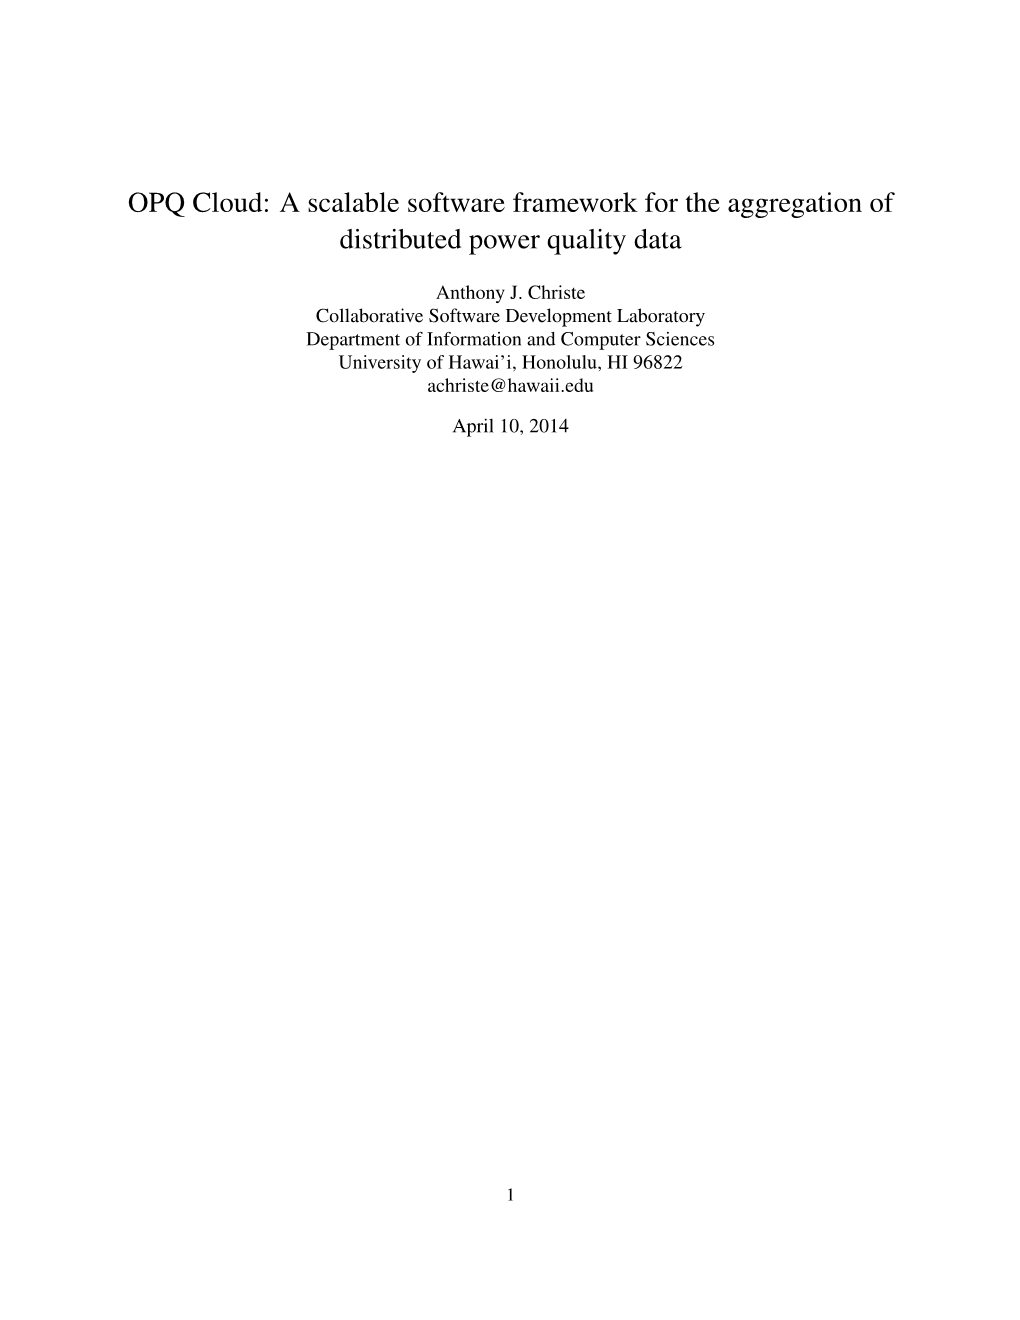 OPQ Cloud: a Scalable Software Framework for the Aggregation of Distributed Power Quality Data